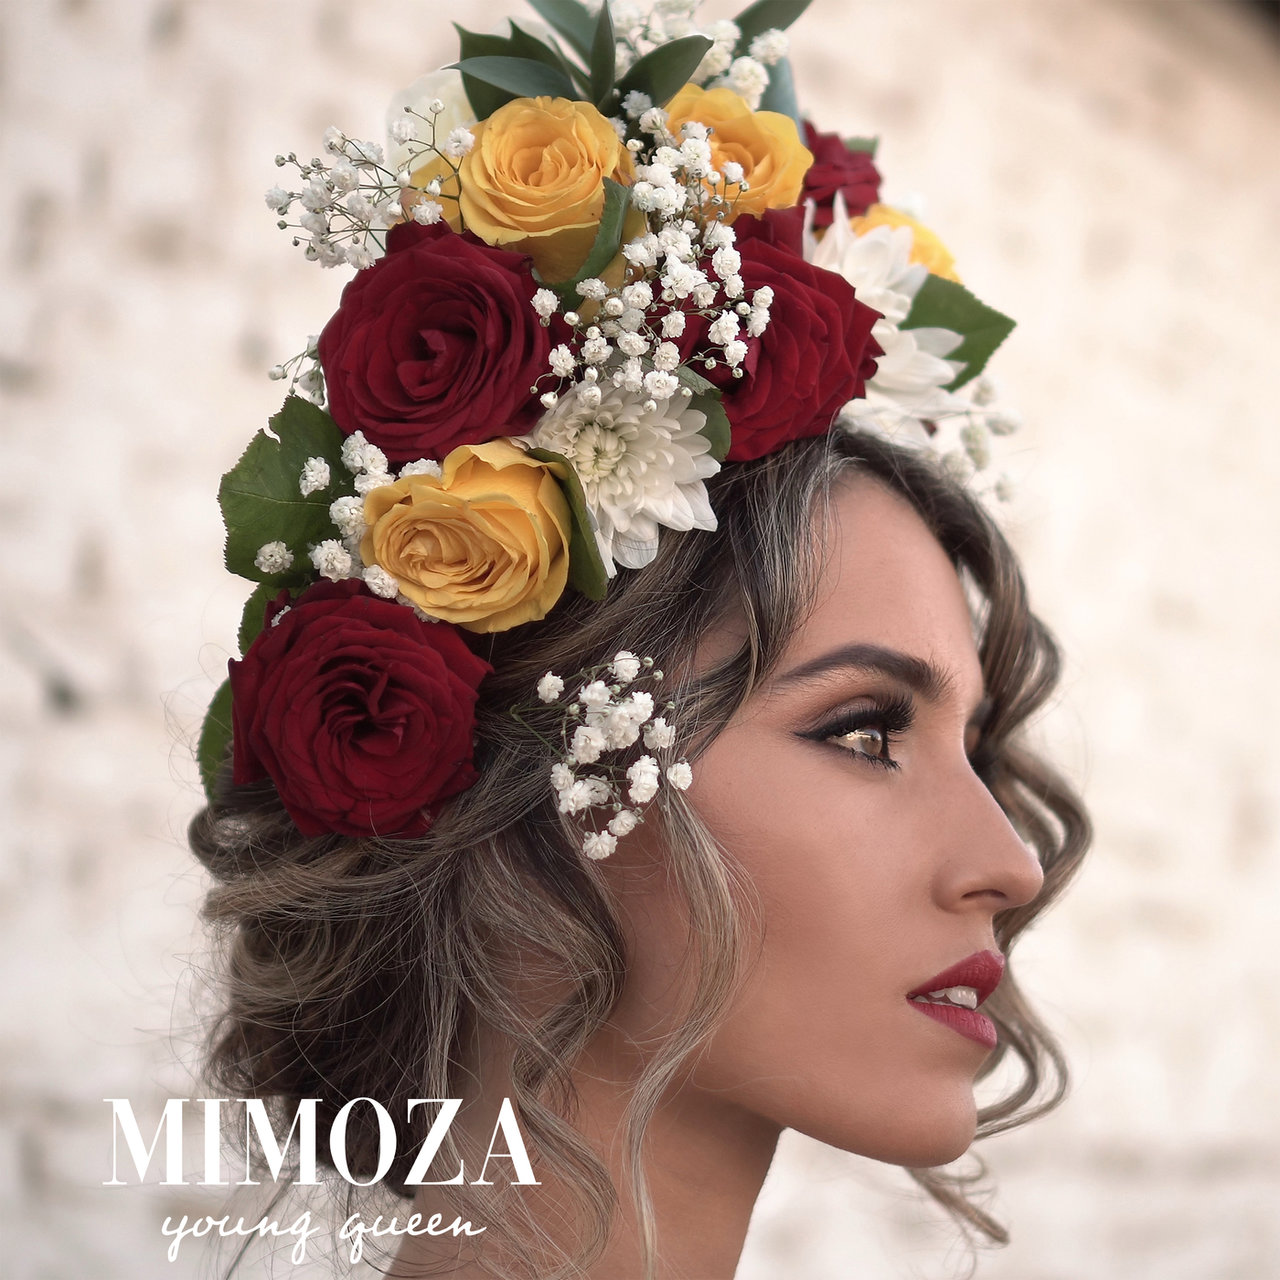 Mimoza Young Queen cover artwork